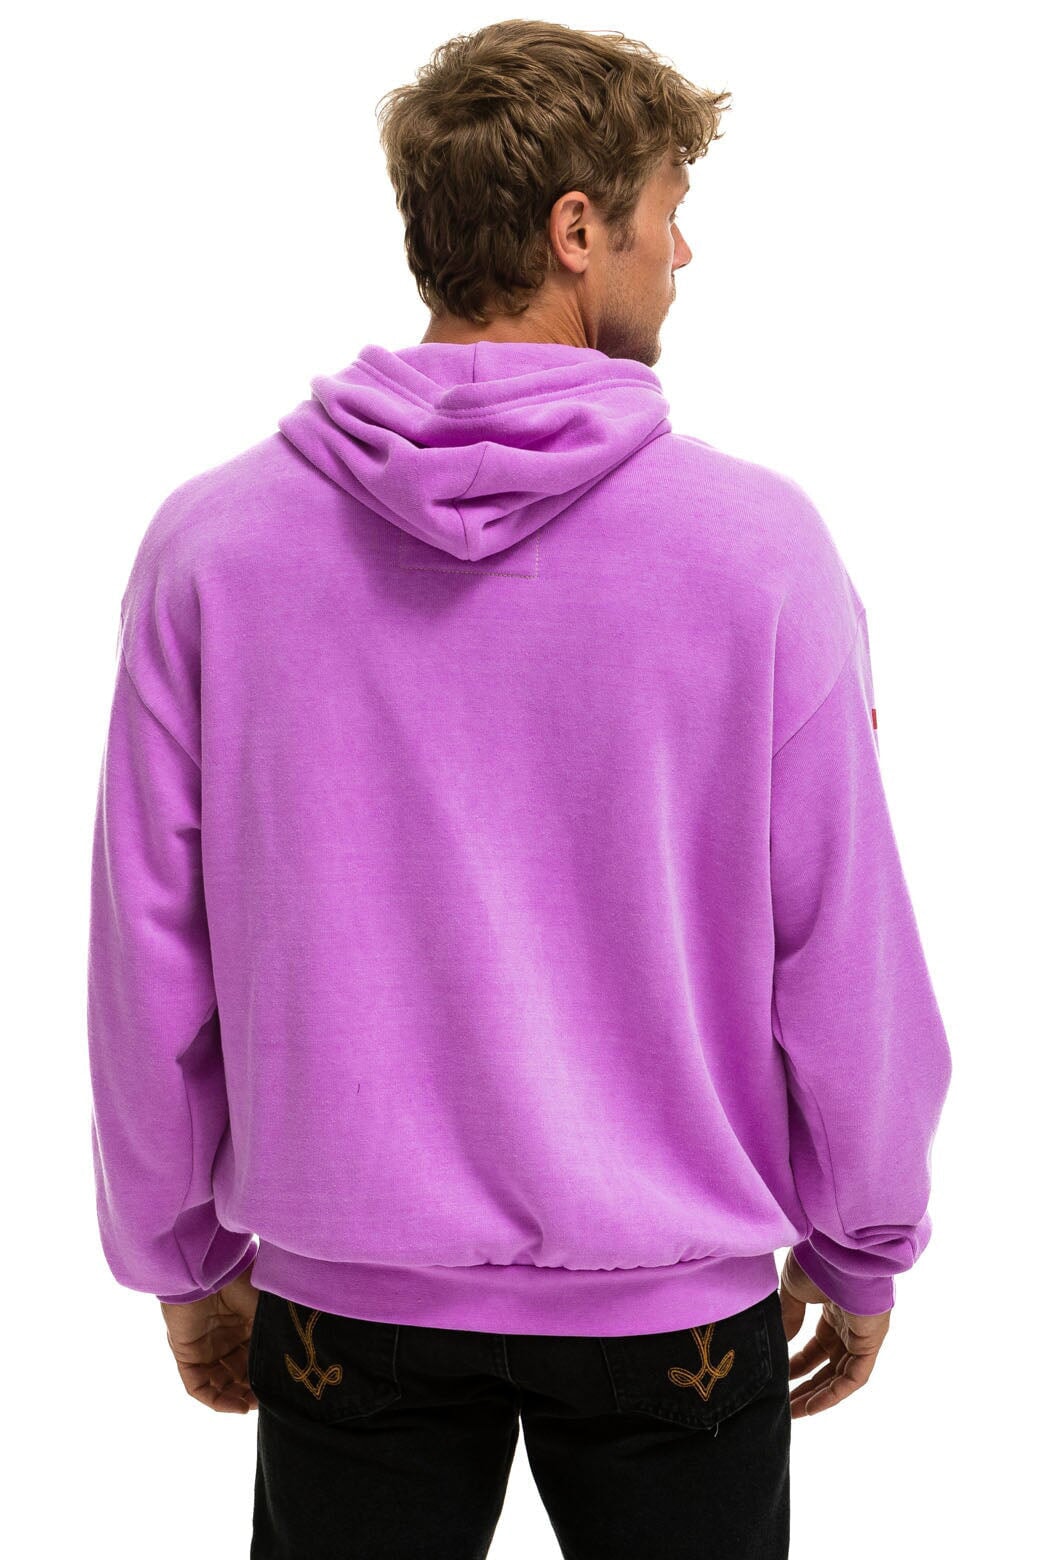 AVIATOR NATION SAN FRANCISCO RELAXED PULLOVER HOODIE - NEON PURPLE Hoodie Aviator Nation 